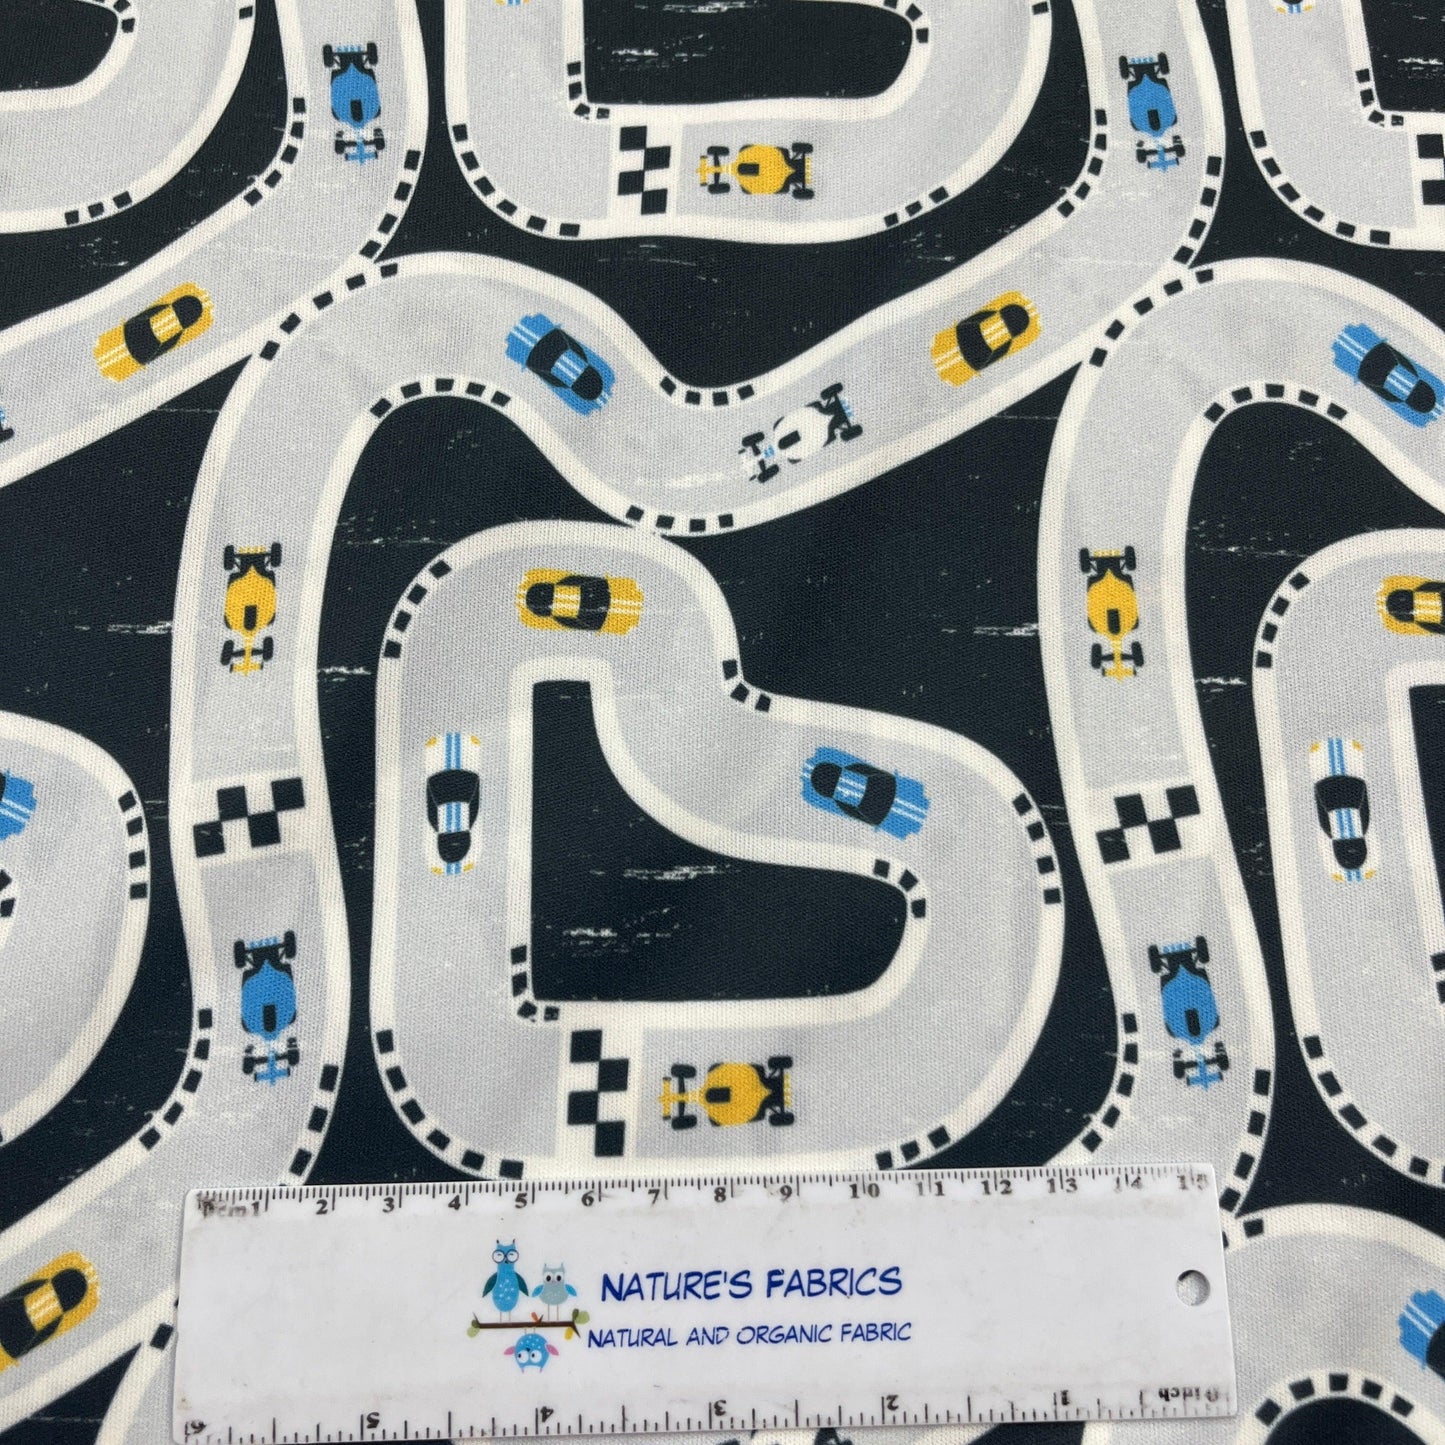 Roadways 1 mil PUL Fabric - Made in the USA - Nature's Fabrics